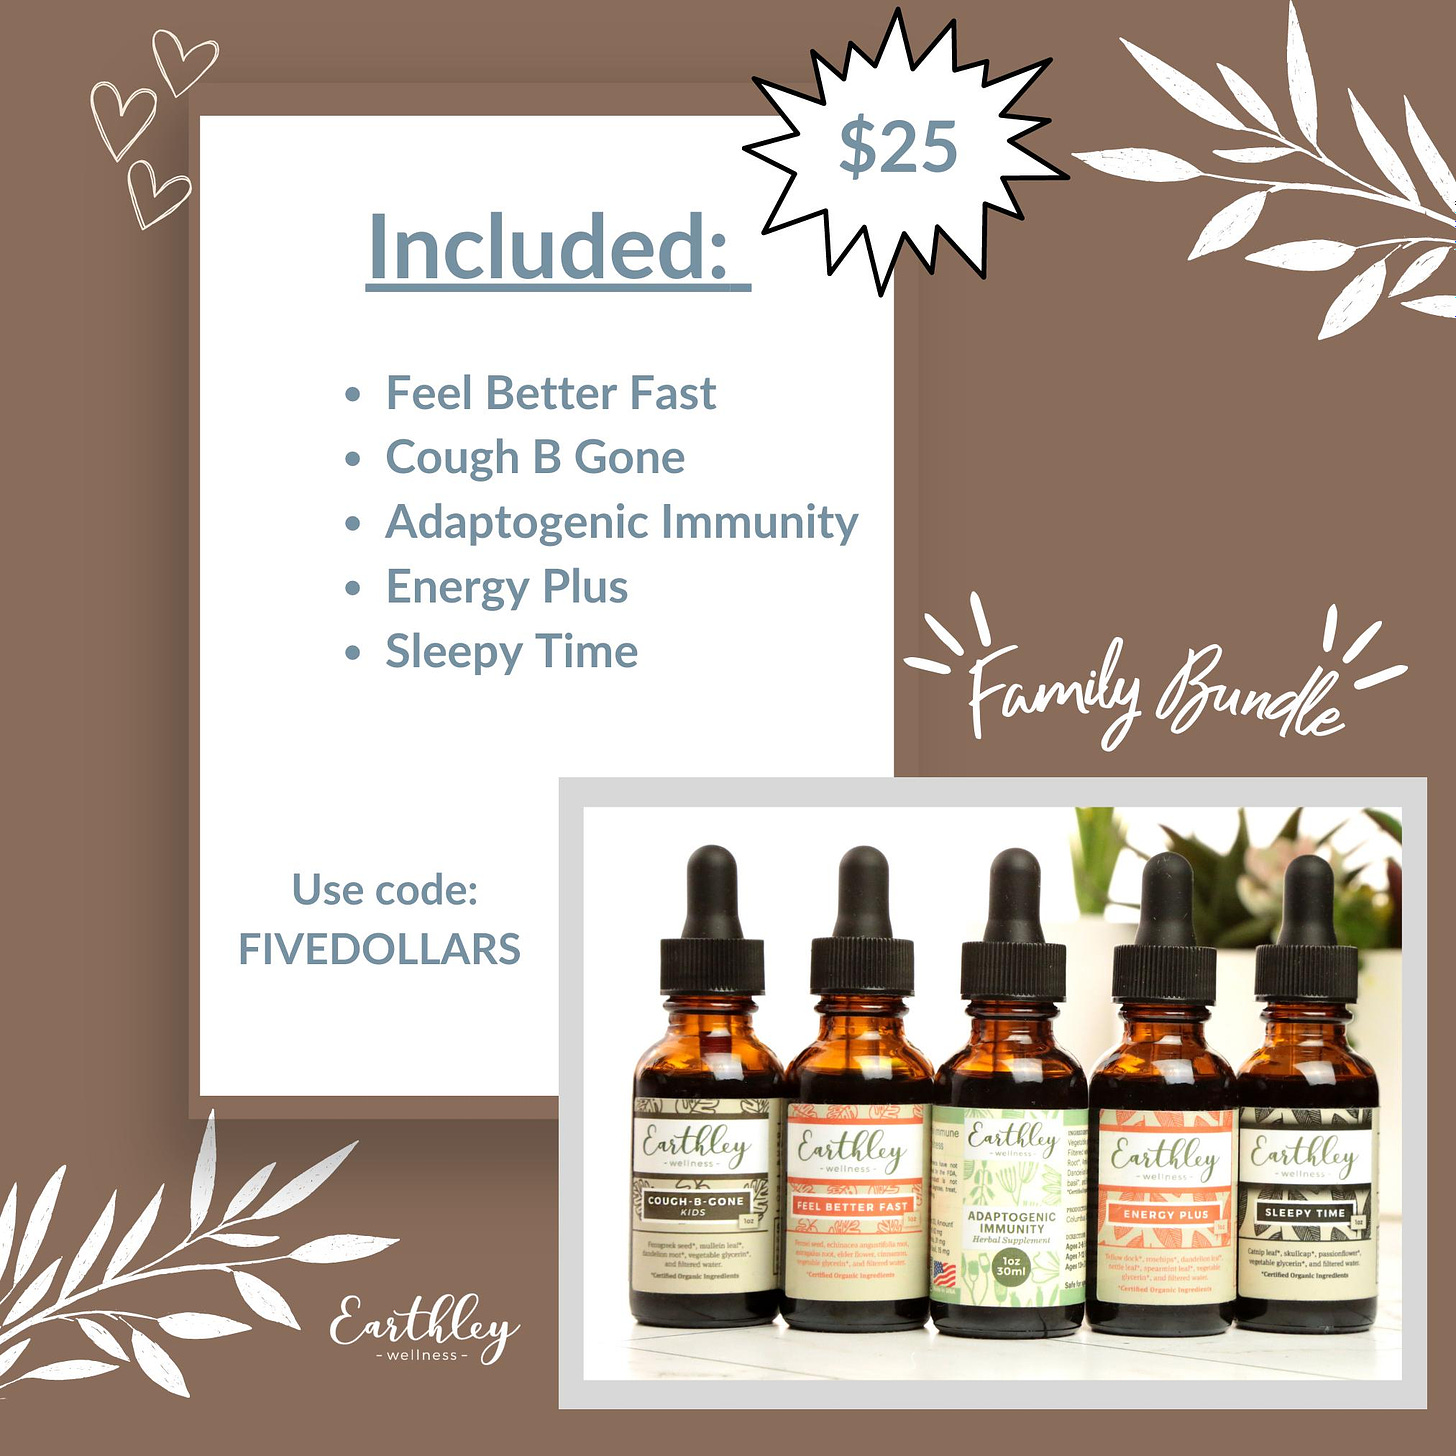 May be an image of medicine, coneflower and text that says '$25 Included: Feel Better Fast Cough Ð Gone •Adaptogenic Immunity Energy Plus •Sleepy Time Family Bundlle Use code: FIVEDOLLARS 2S Earthley Earthley Earthley ( Earthley ADAPTOGENIC ENERGYPLUS Earthley wellness-'